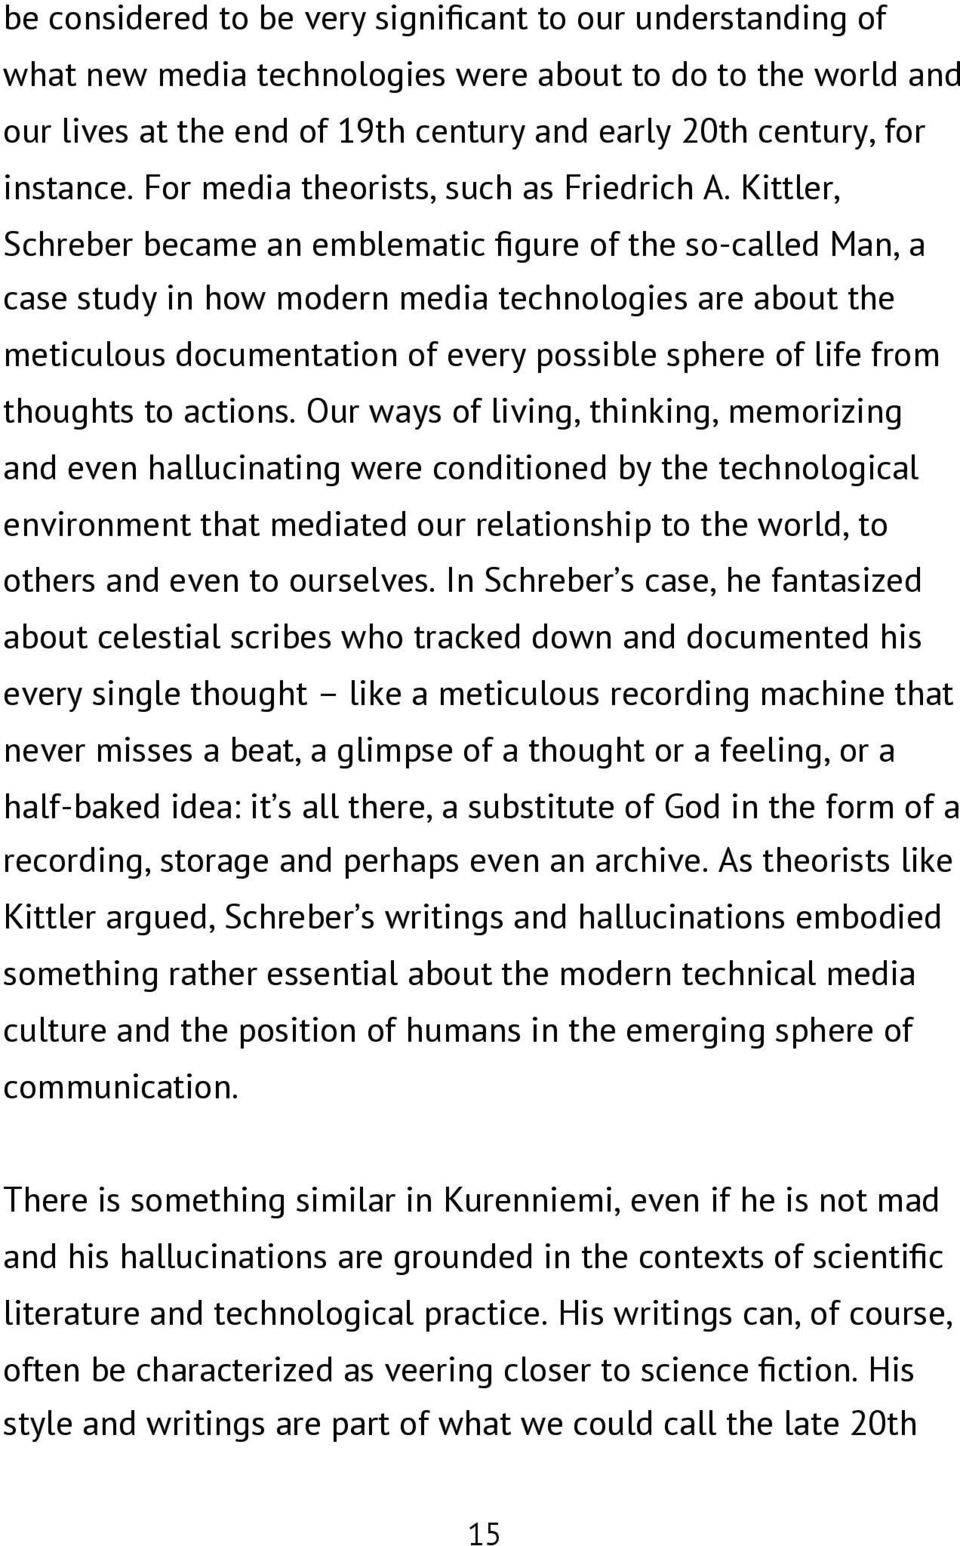 Kittler, Schreber became an emblematic figure of the so-called Man, a case study in how modern media technologies are about the meticulous documentation of every possible sphere of life from thoughts